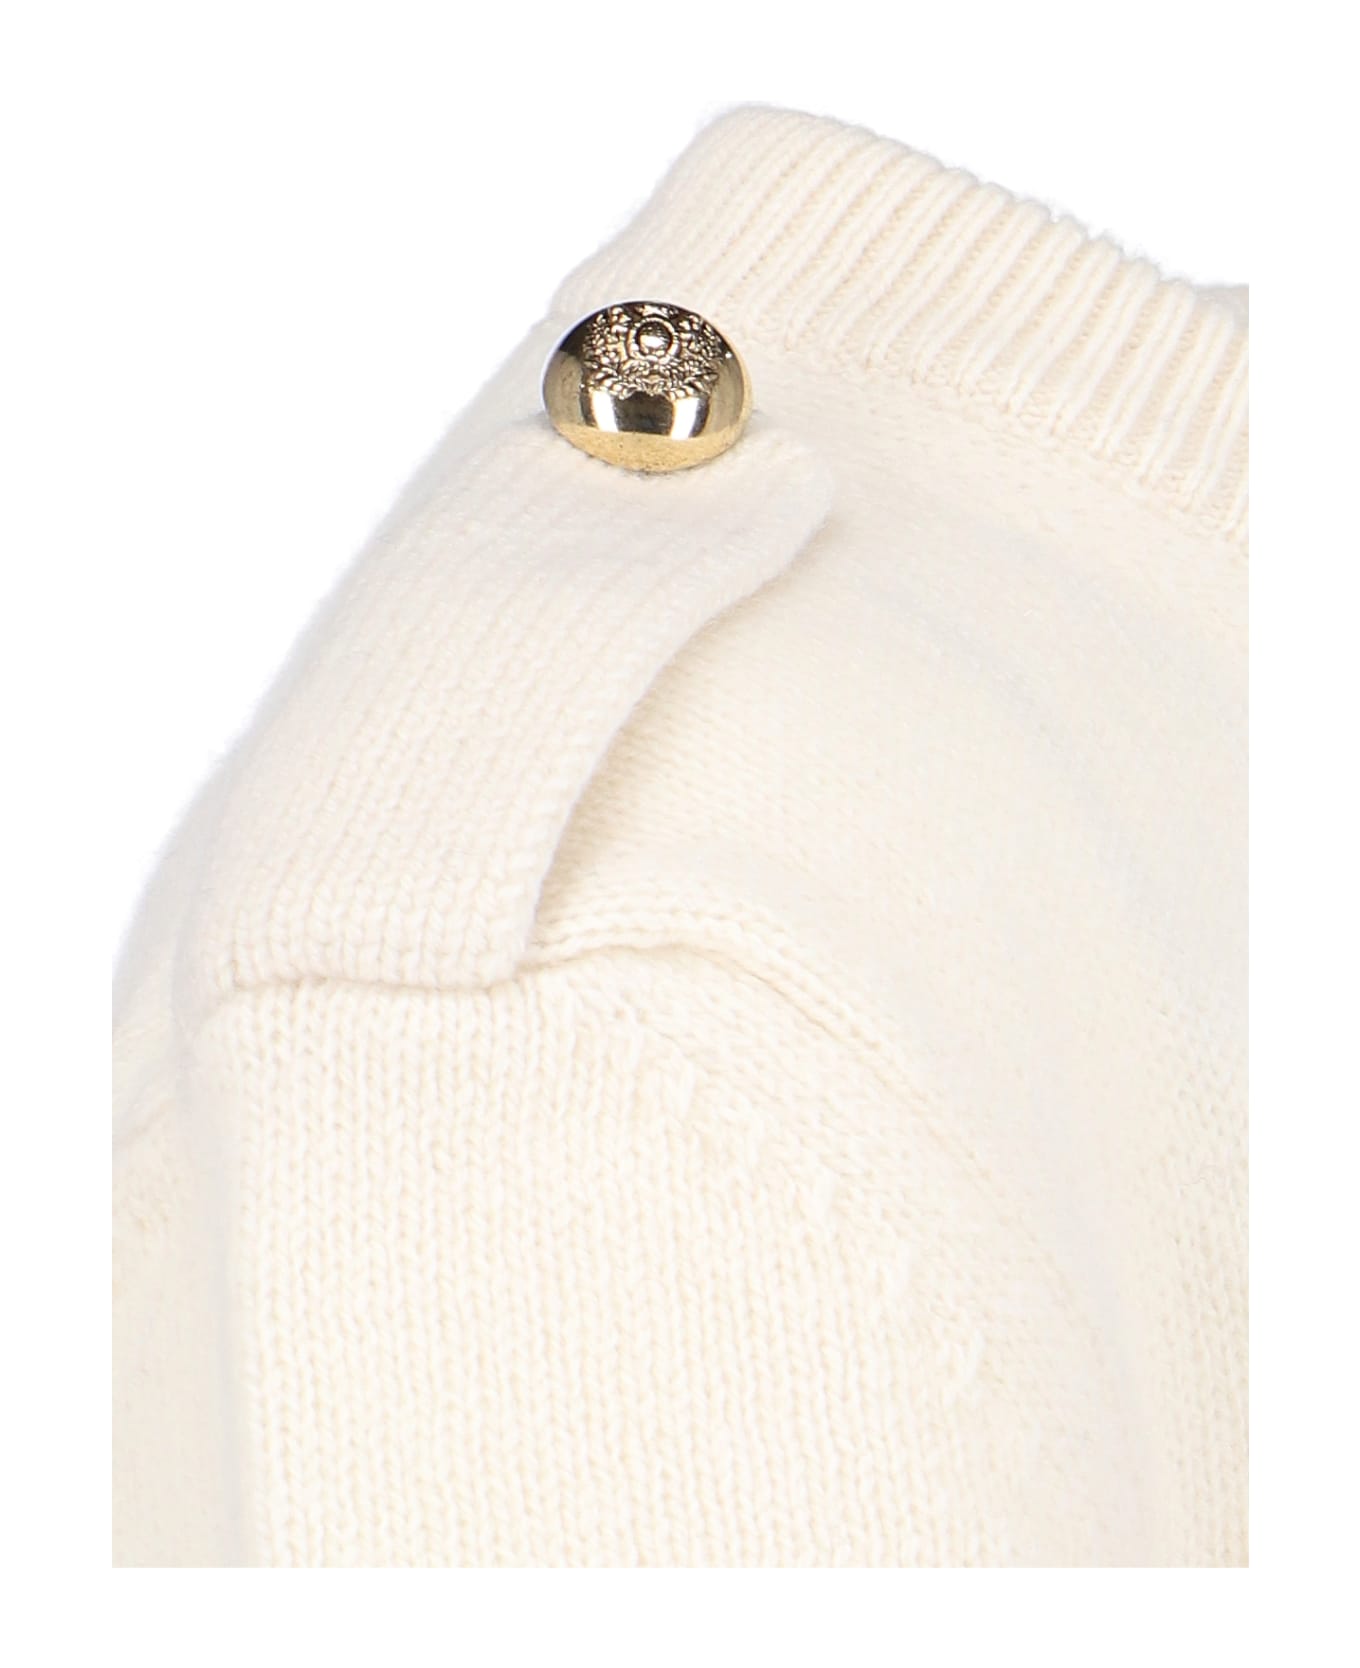 Alexander McQueen Pullover With Peplum Waist And Jewel Buttons - White